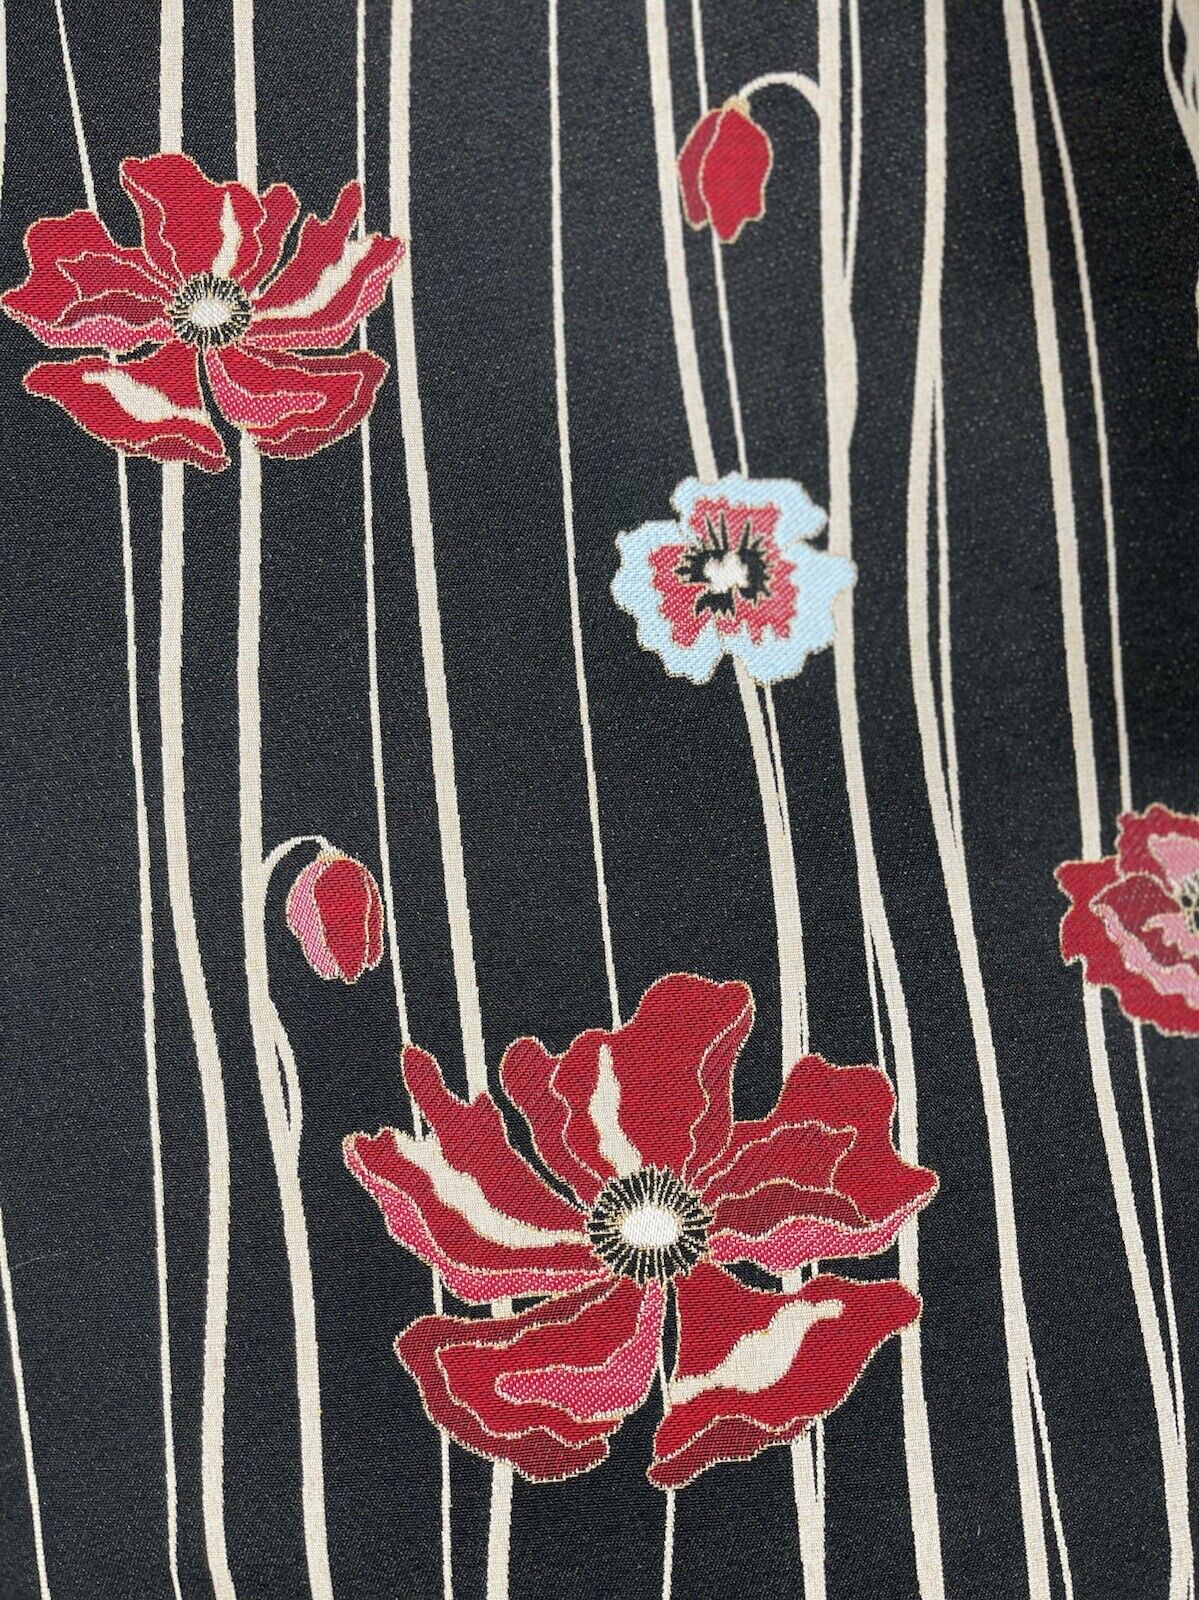 Poppy Woven Fabric Sold by Meter Upholstery Black Red Buds Streams Leaves Stripe